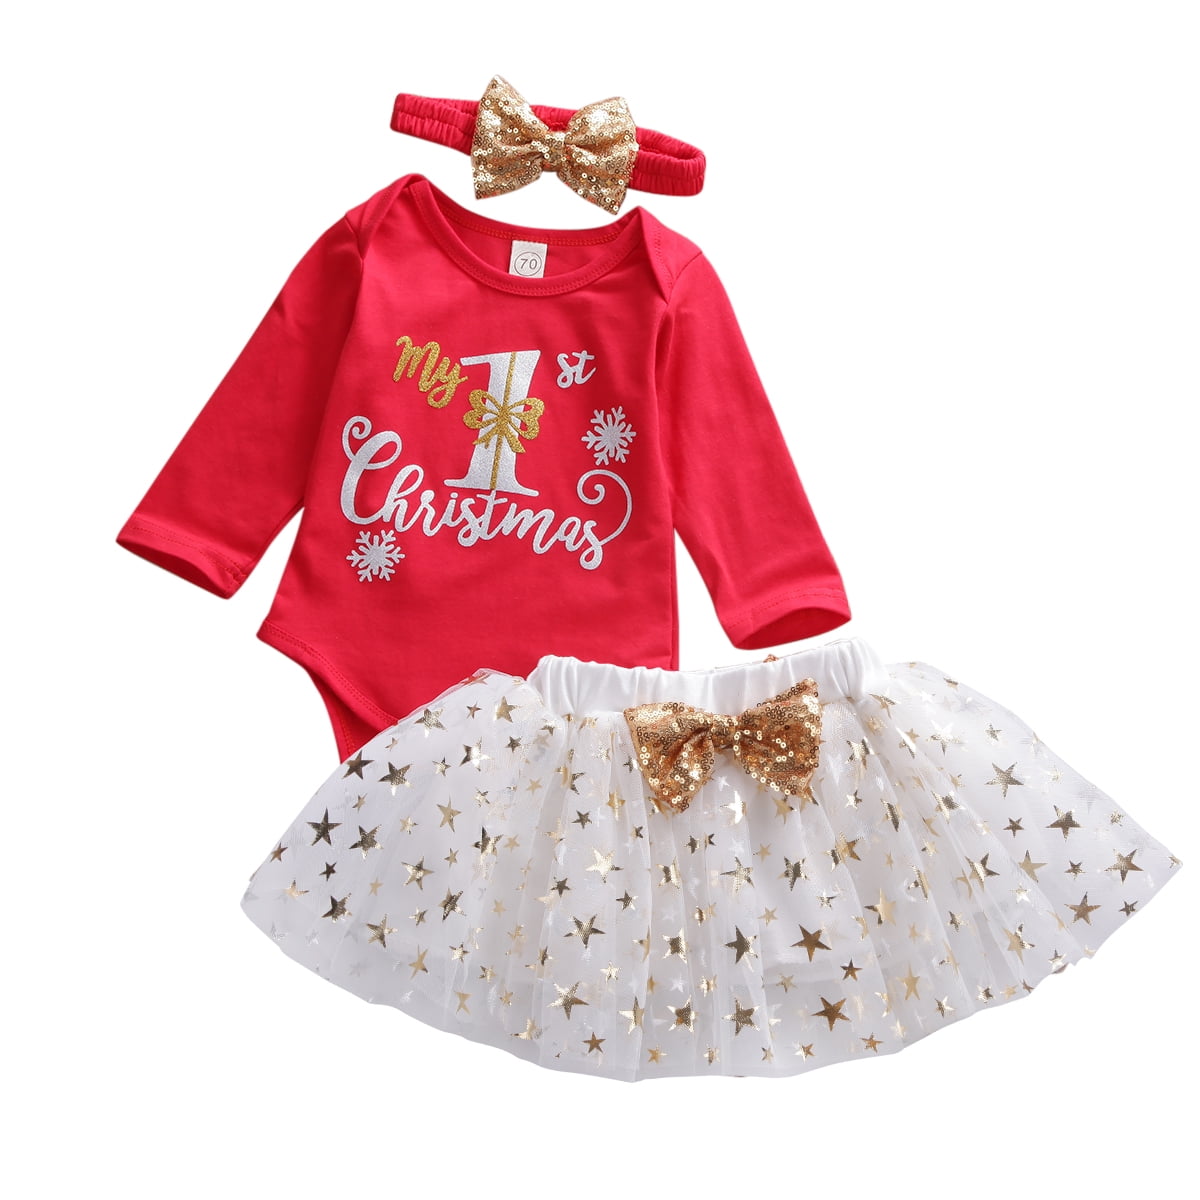 Toddler Baby Girls Christmas Romper Dress Outfits Sleeveless Lace Up Sequined Jumpsuits Tutu Skirt Costume Clothes 